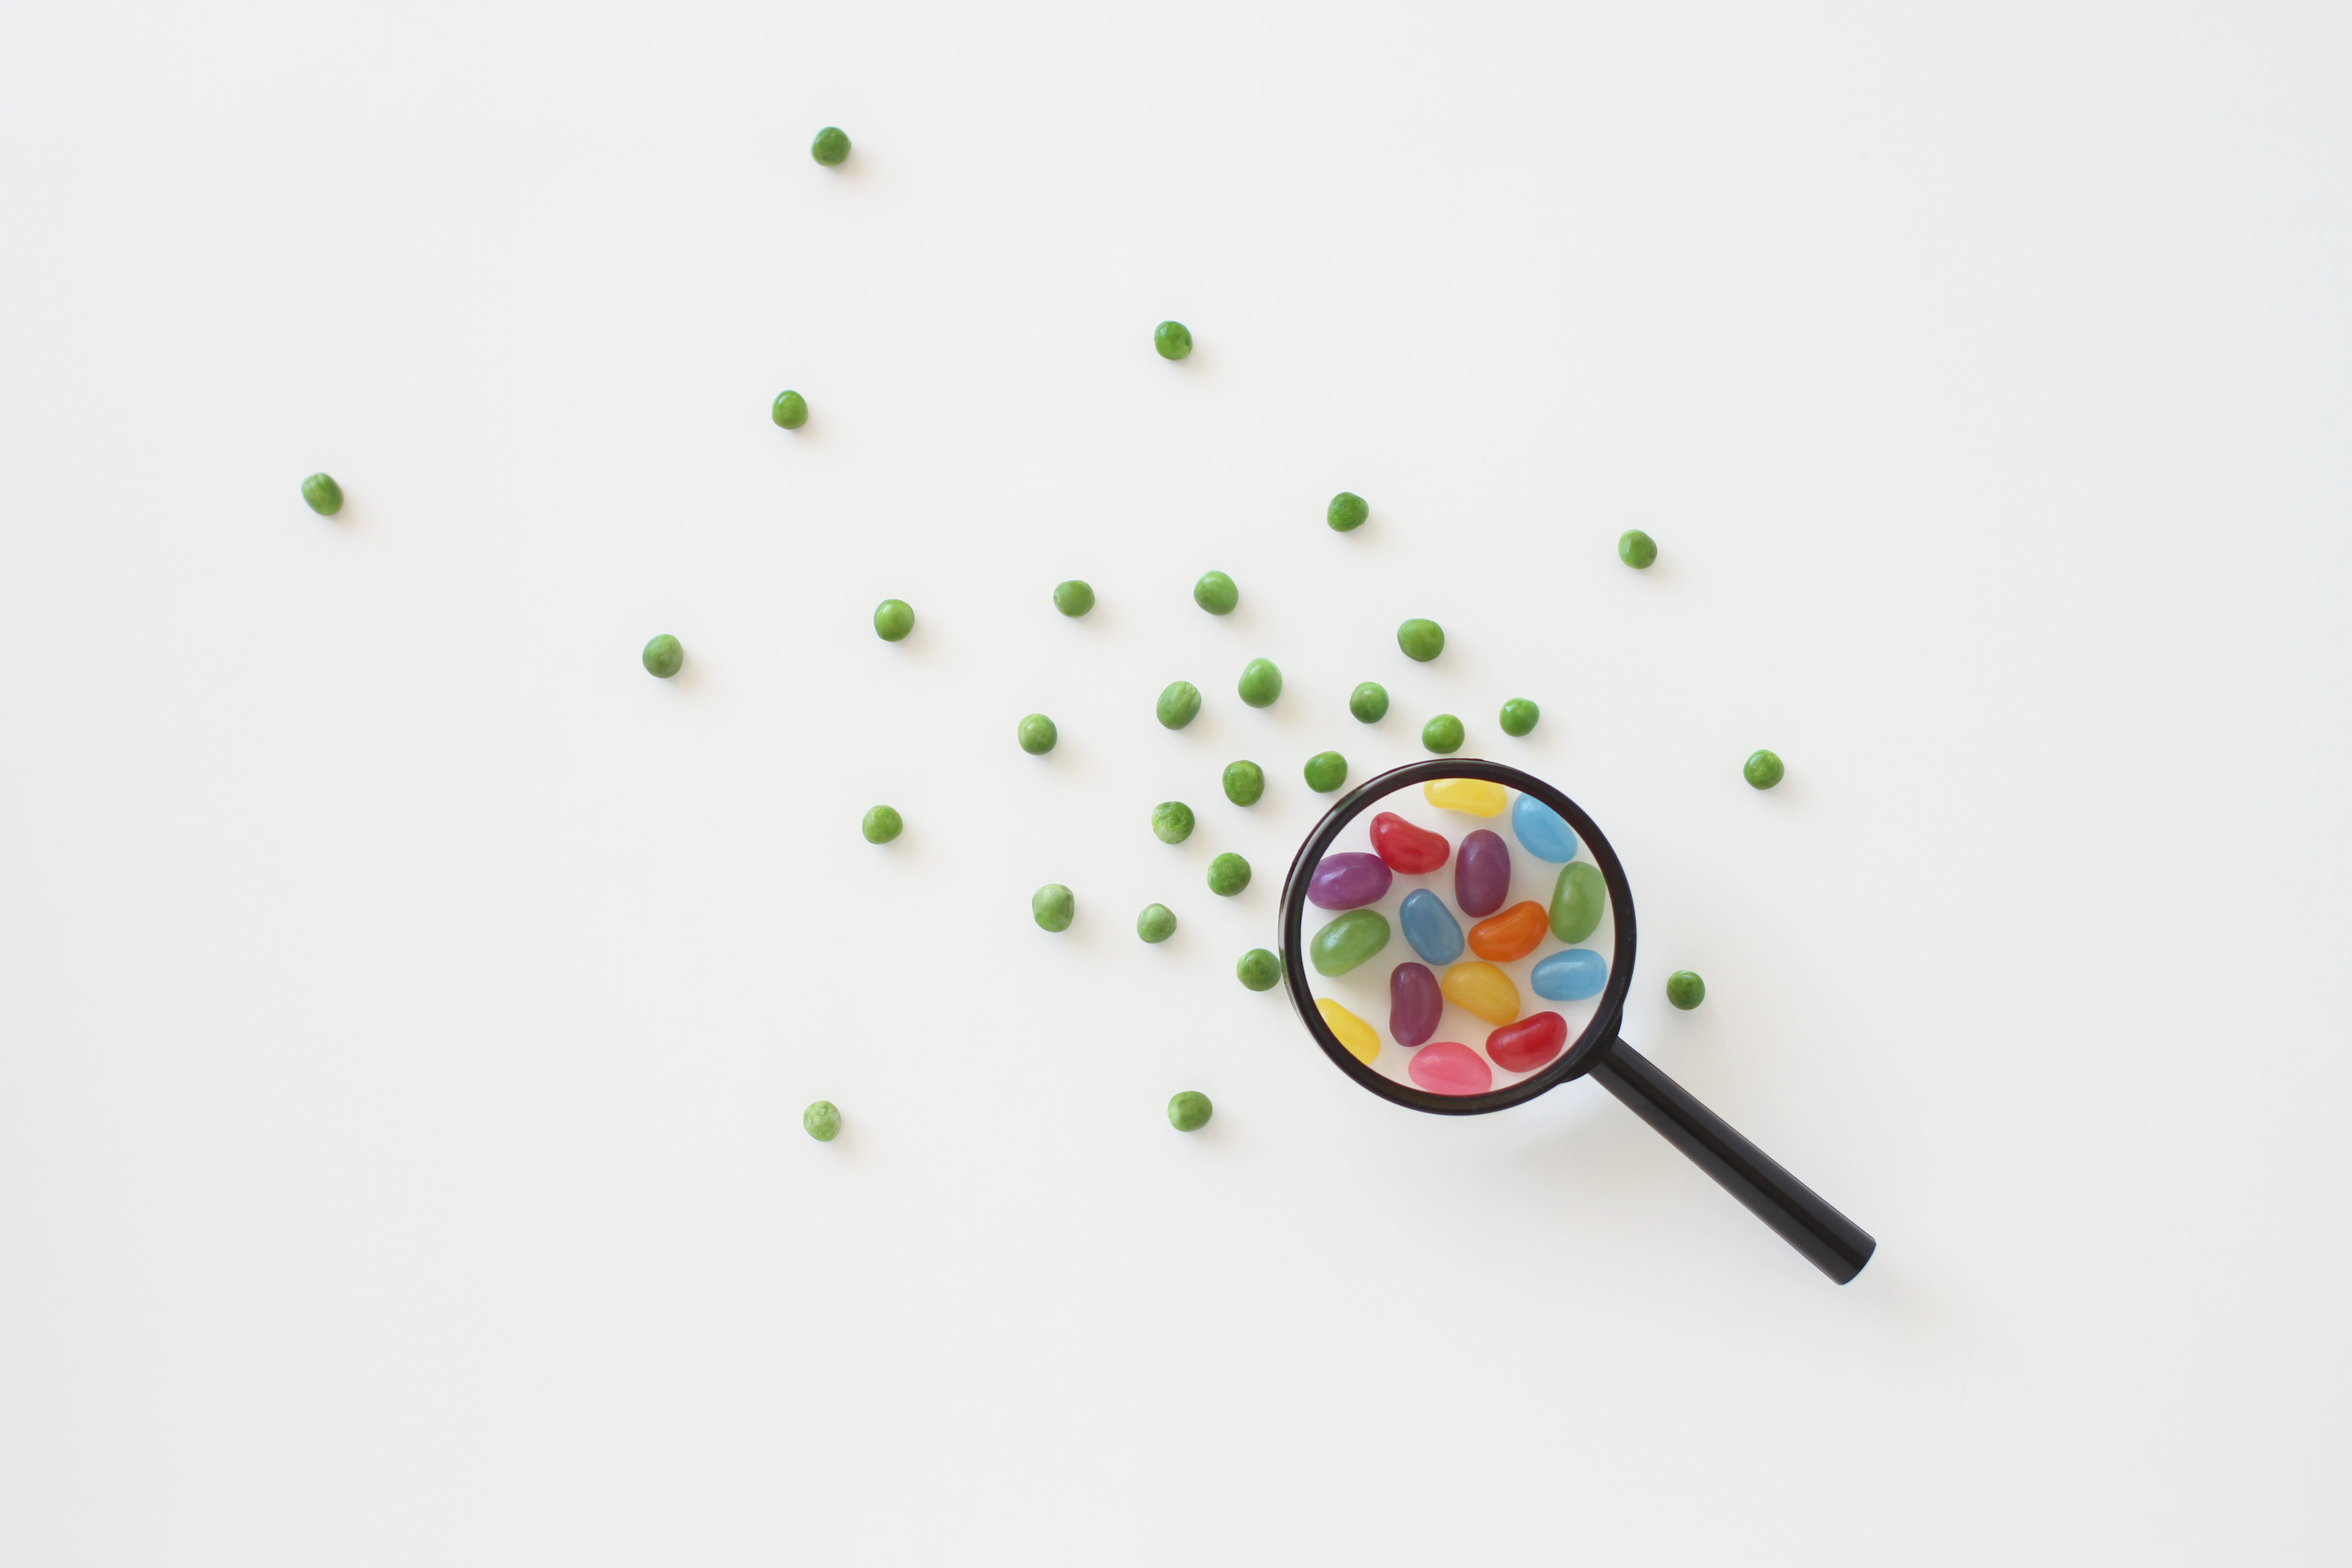 Image of jellybeans under a magnifying glass surrounded by peas to represent regulatory oversight.